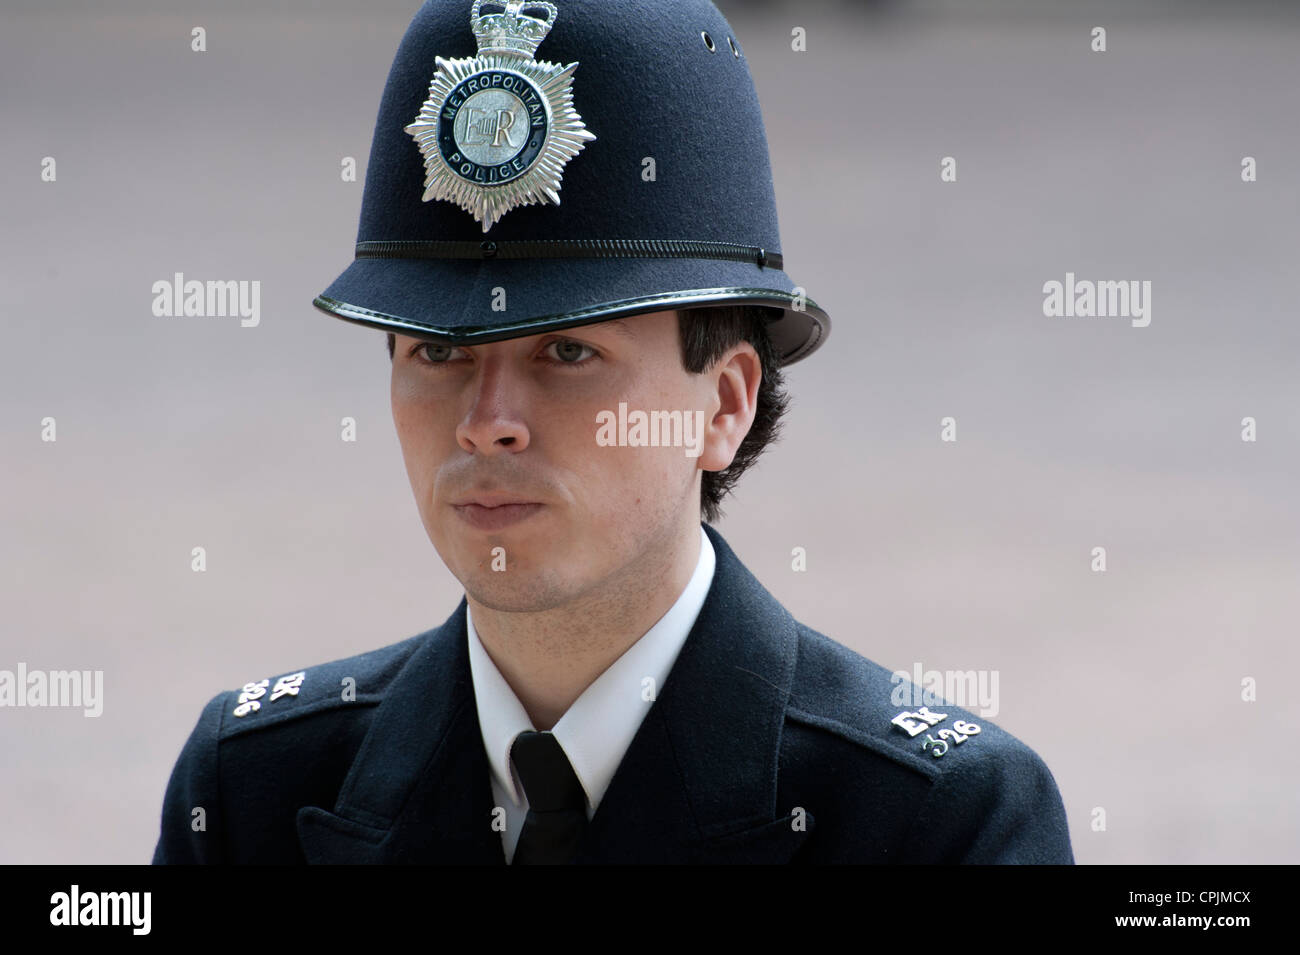 British police constable stands guard on London's The Mall during the wedding of the Duke & Duchess of Cambridge. Stock Photo